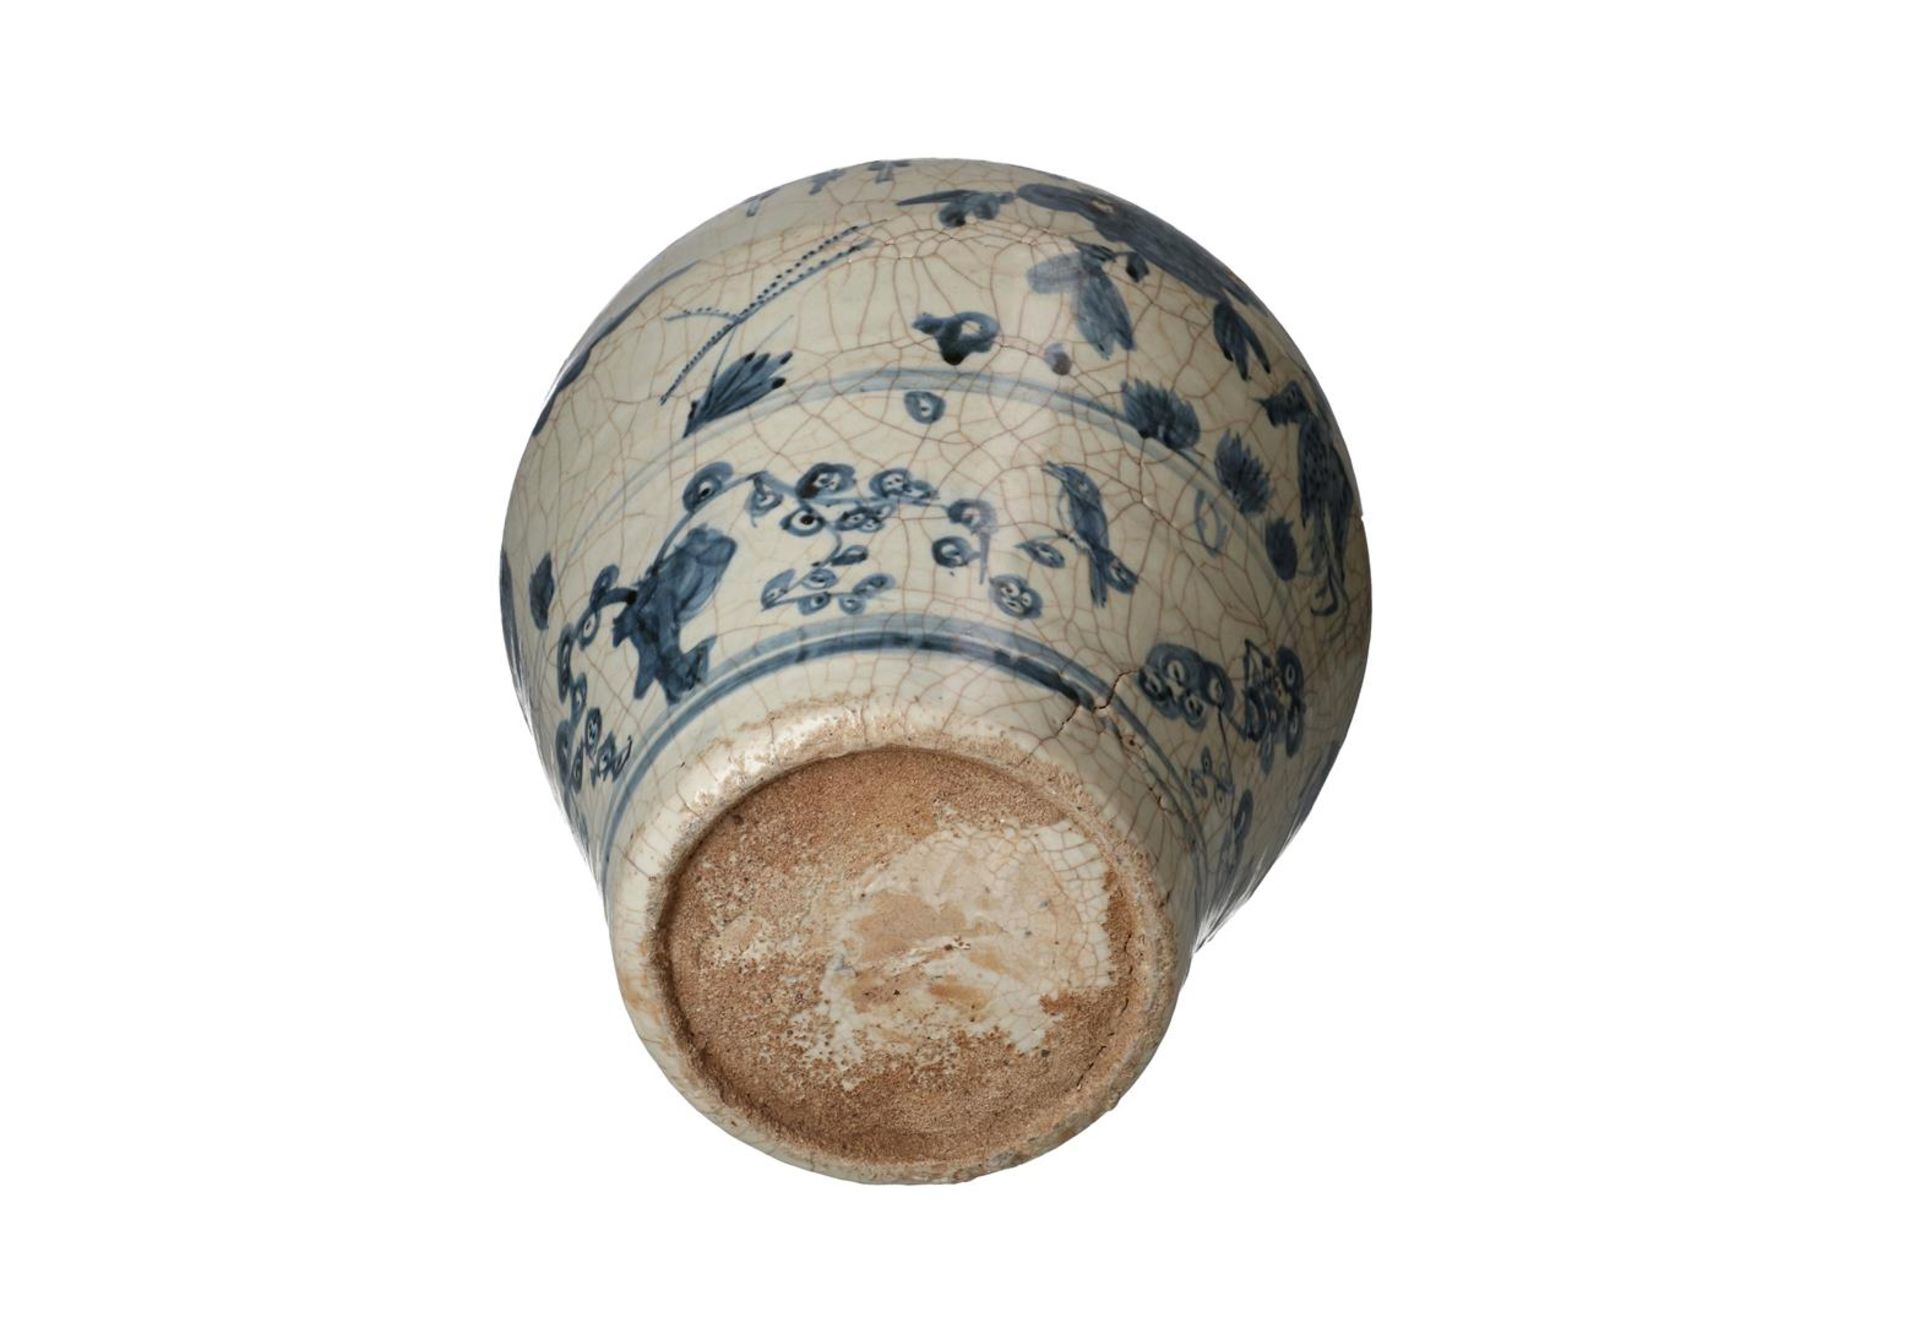 A blue and white Swatow porcelain martaban jar with four grips, decorated with flowers and - Image 6 of 6